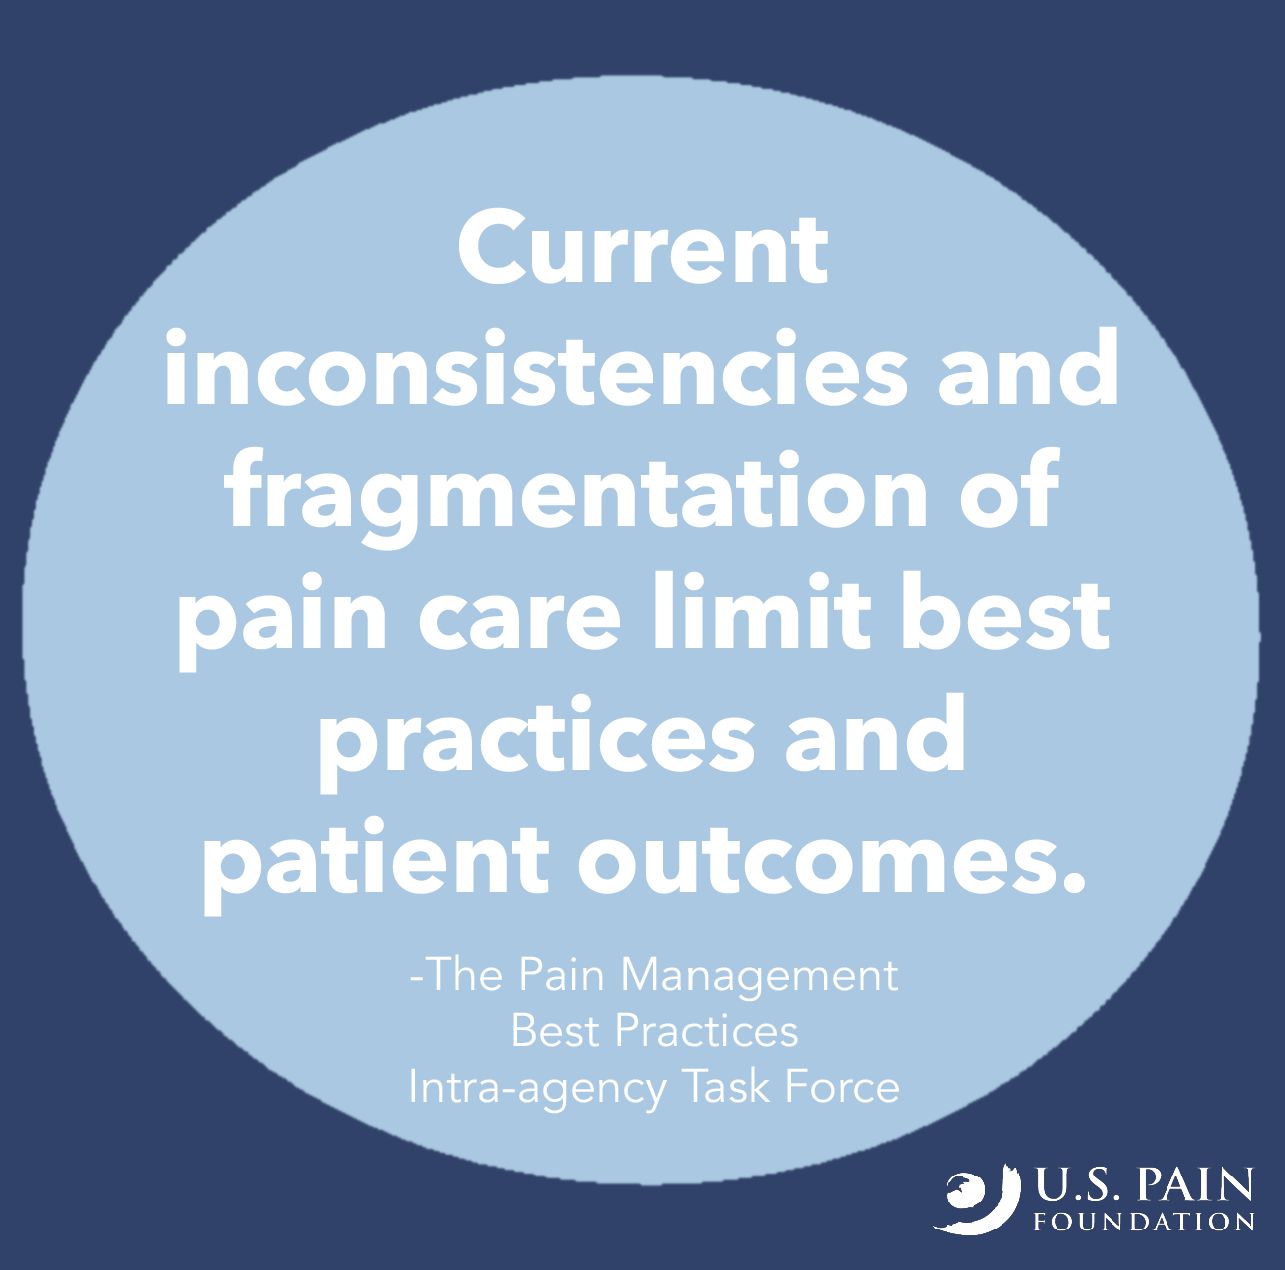 Learn about the draft report on pain management